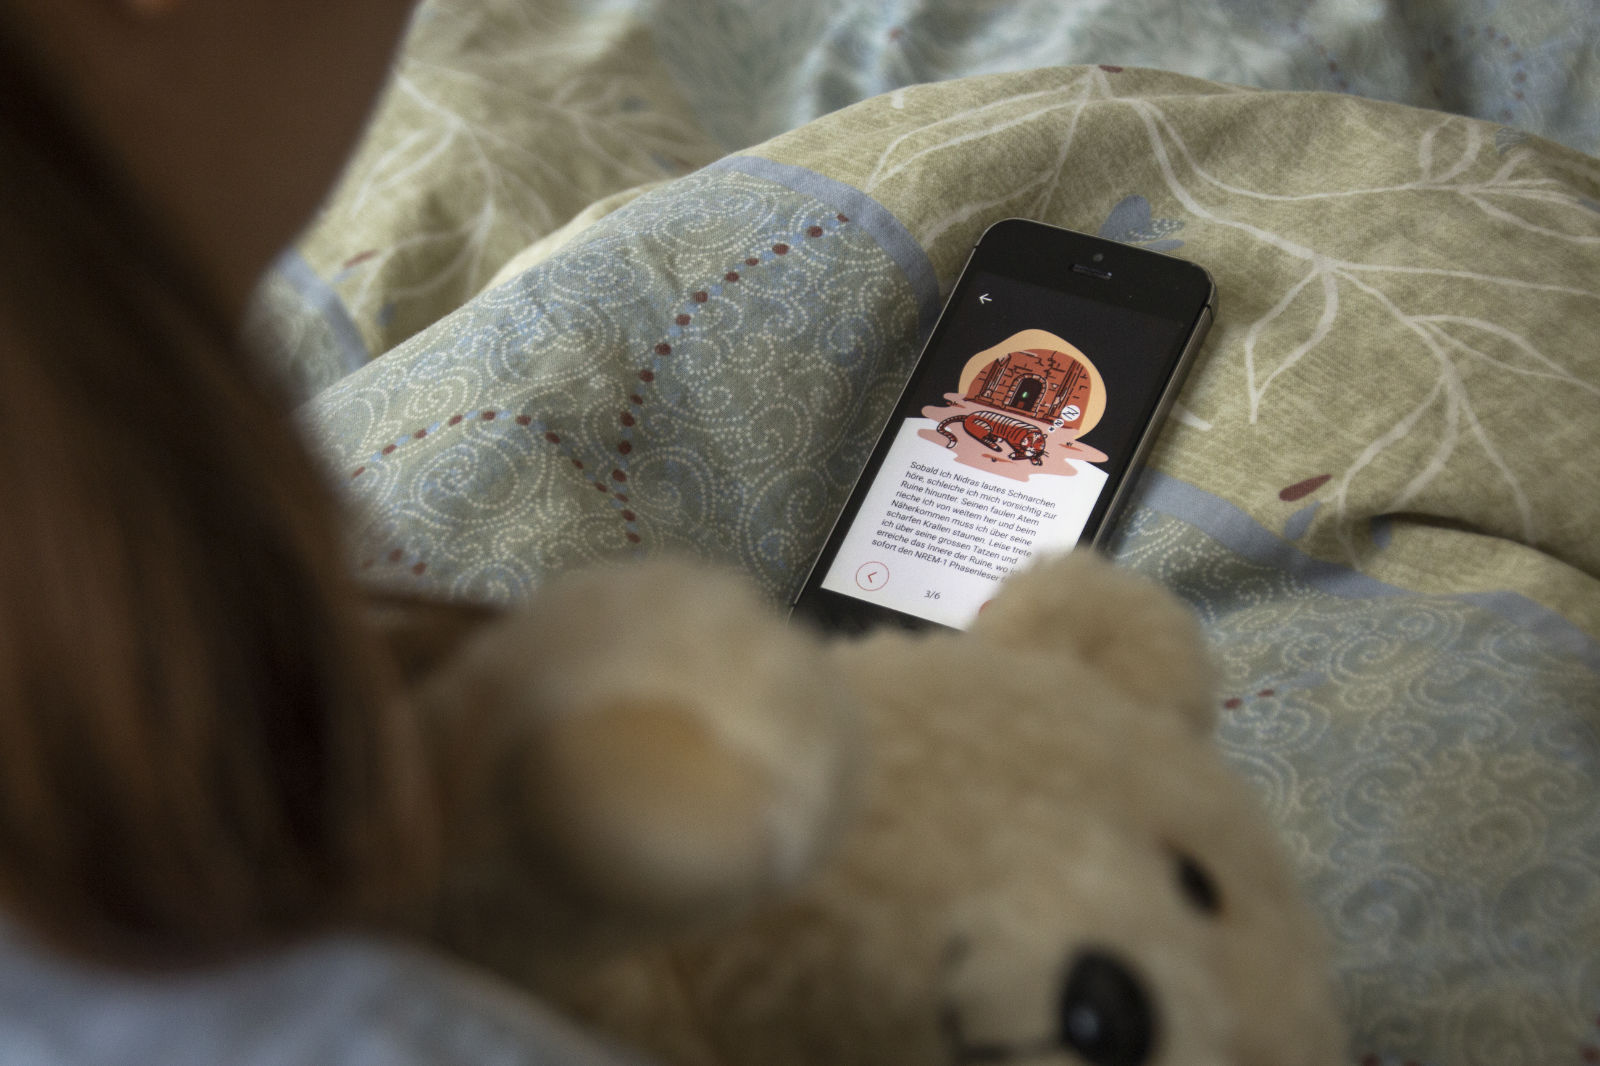 Child looking at app in bed